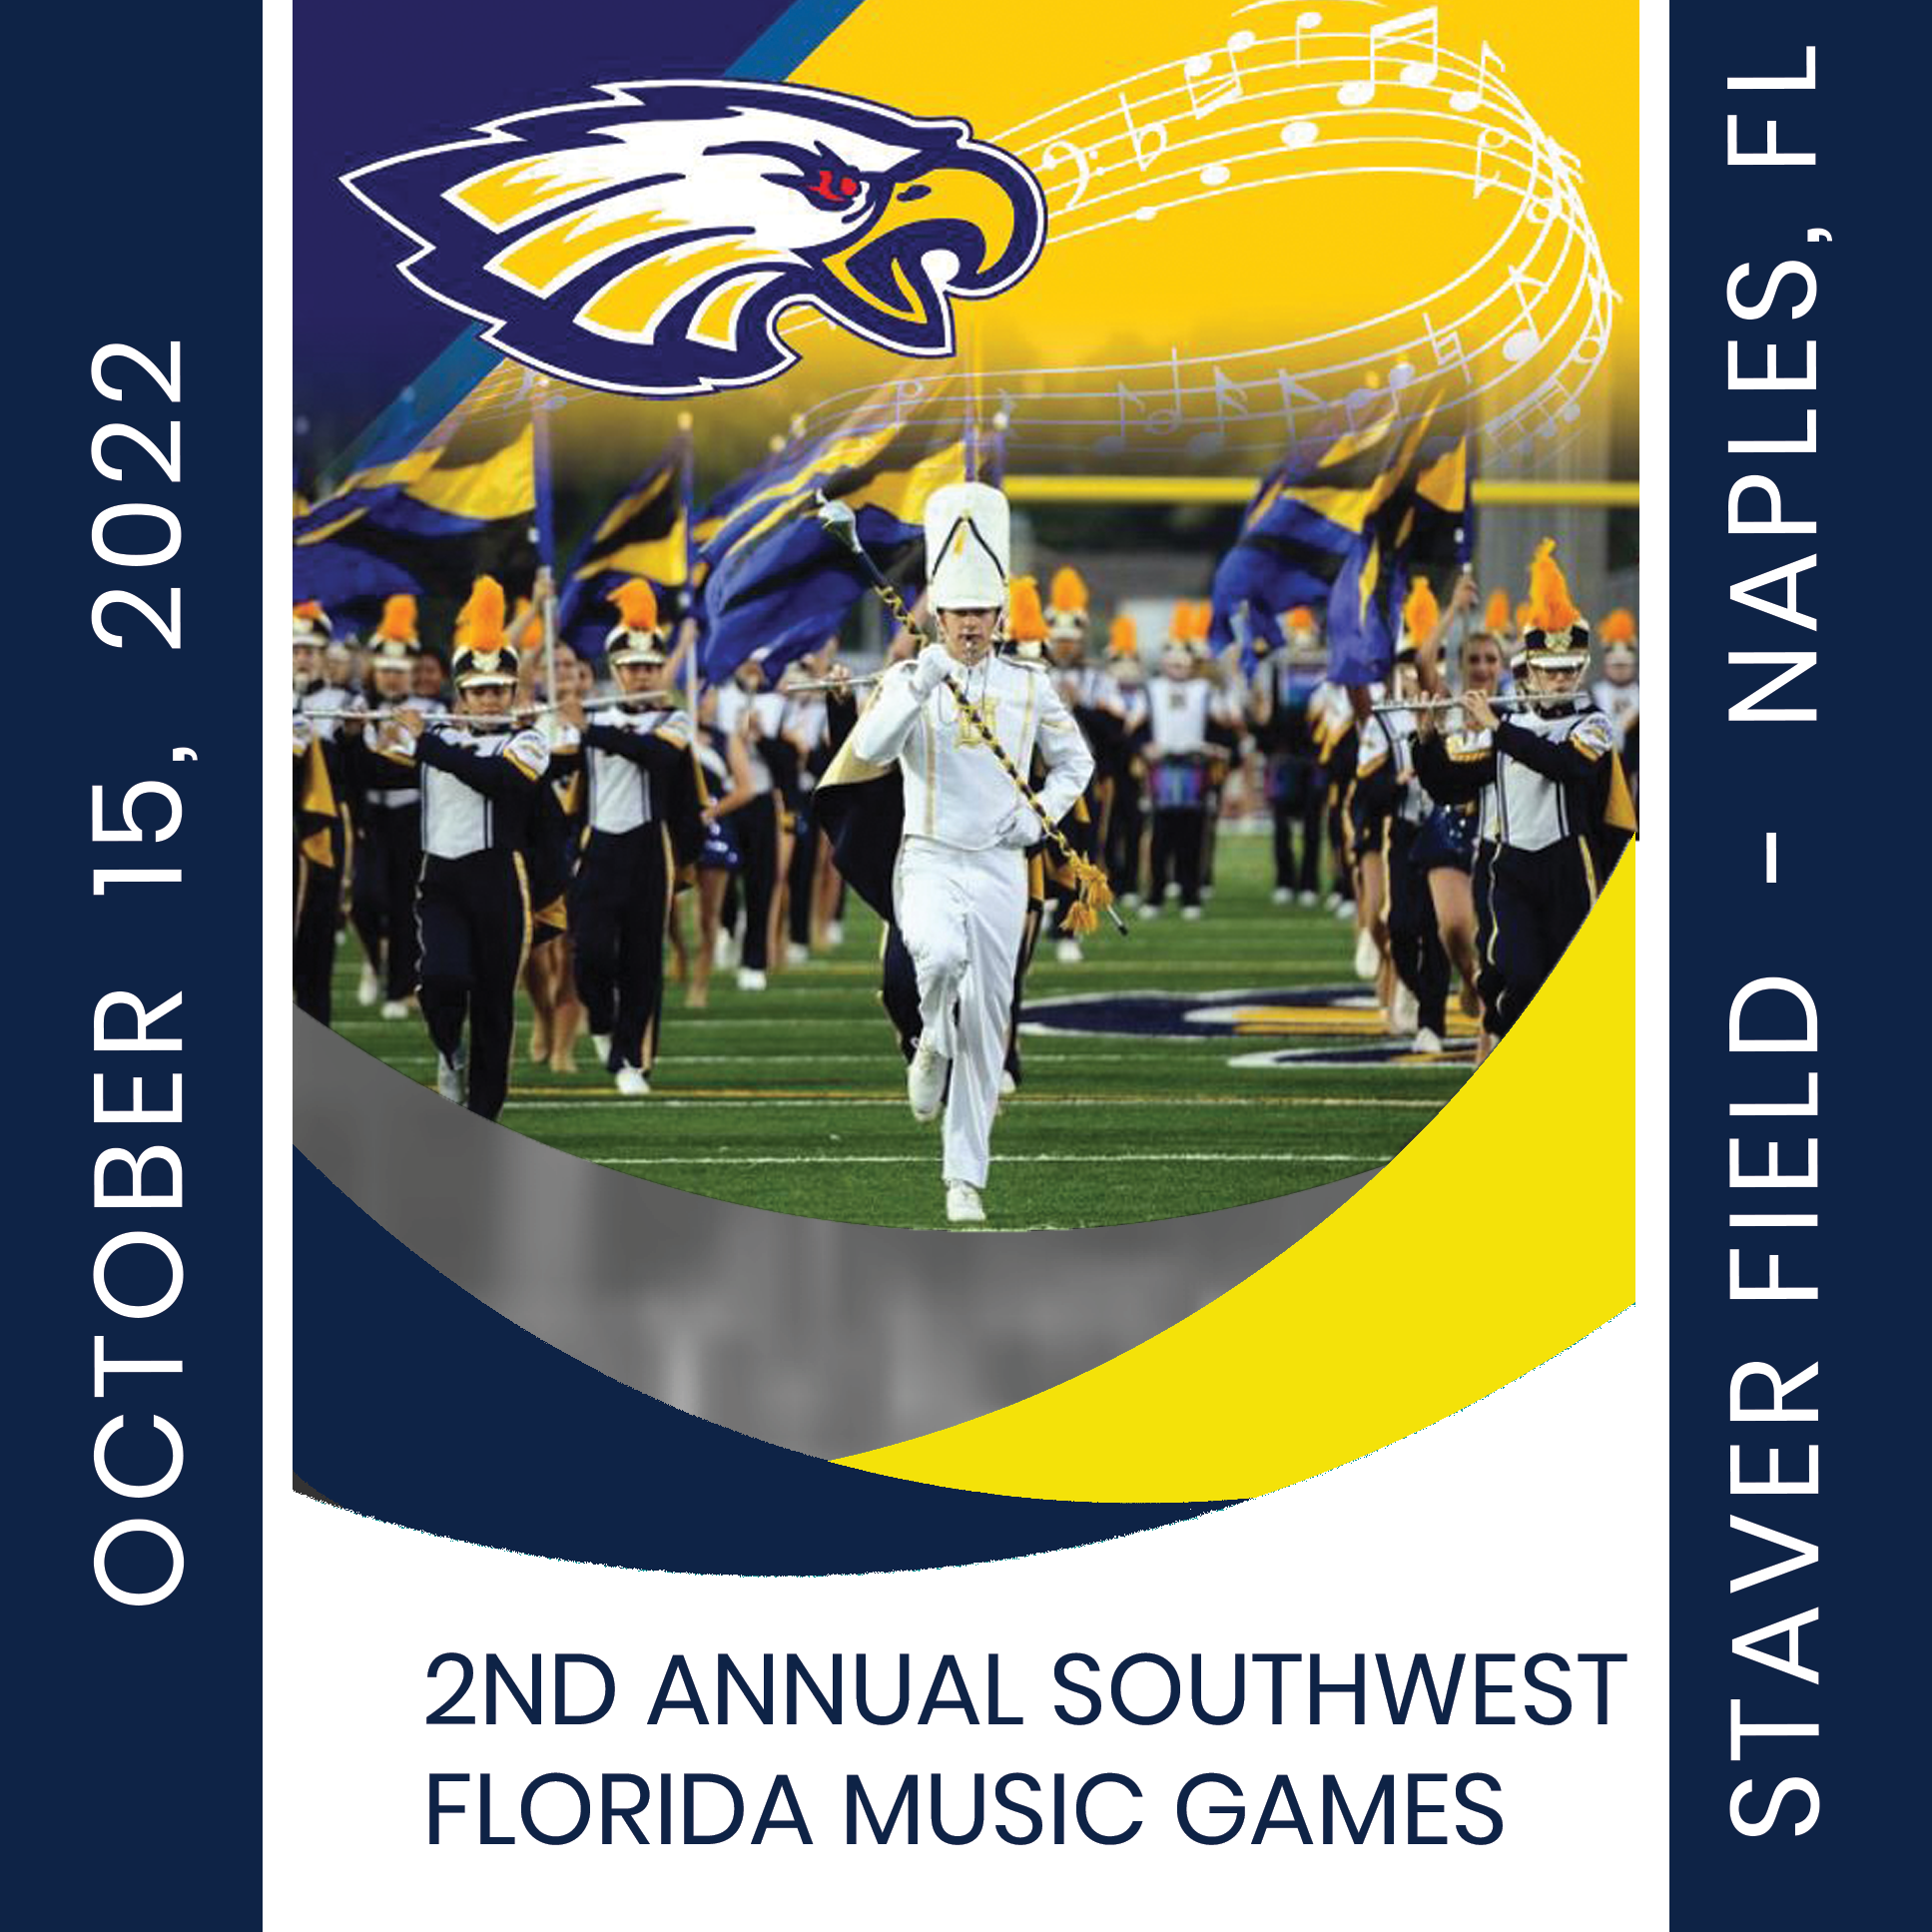 2nd Annual SW FL Music Games at Naples High